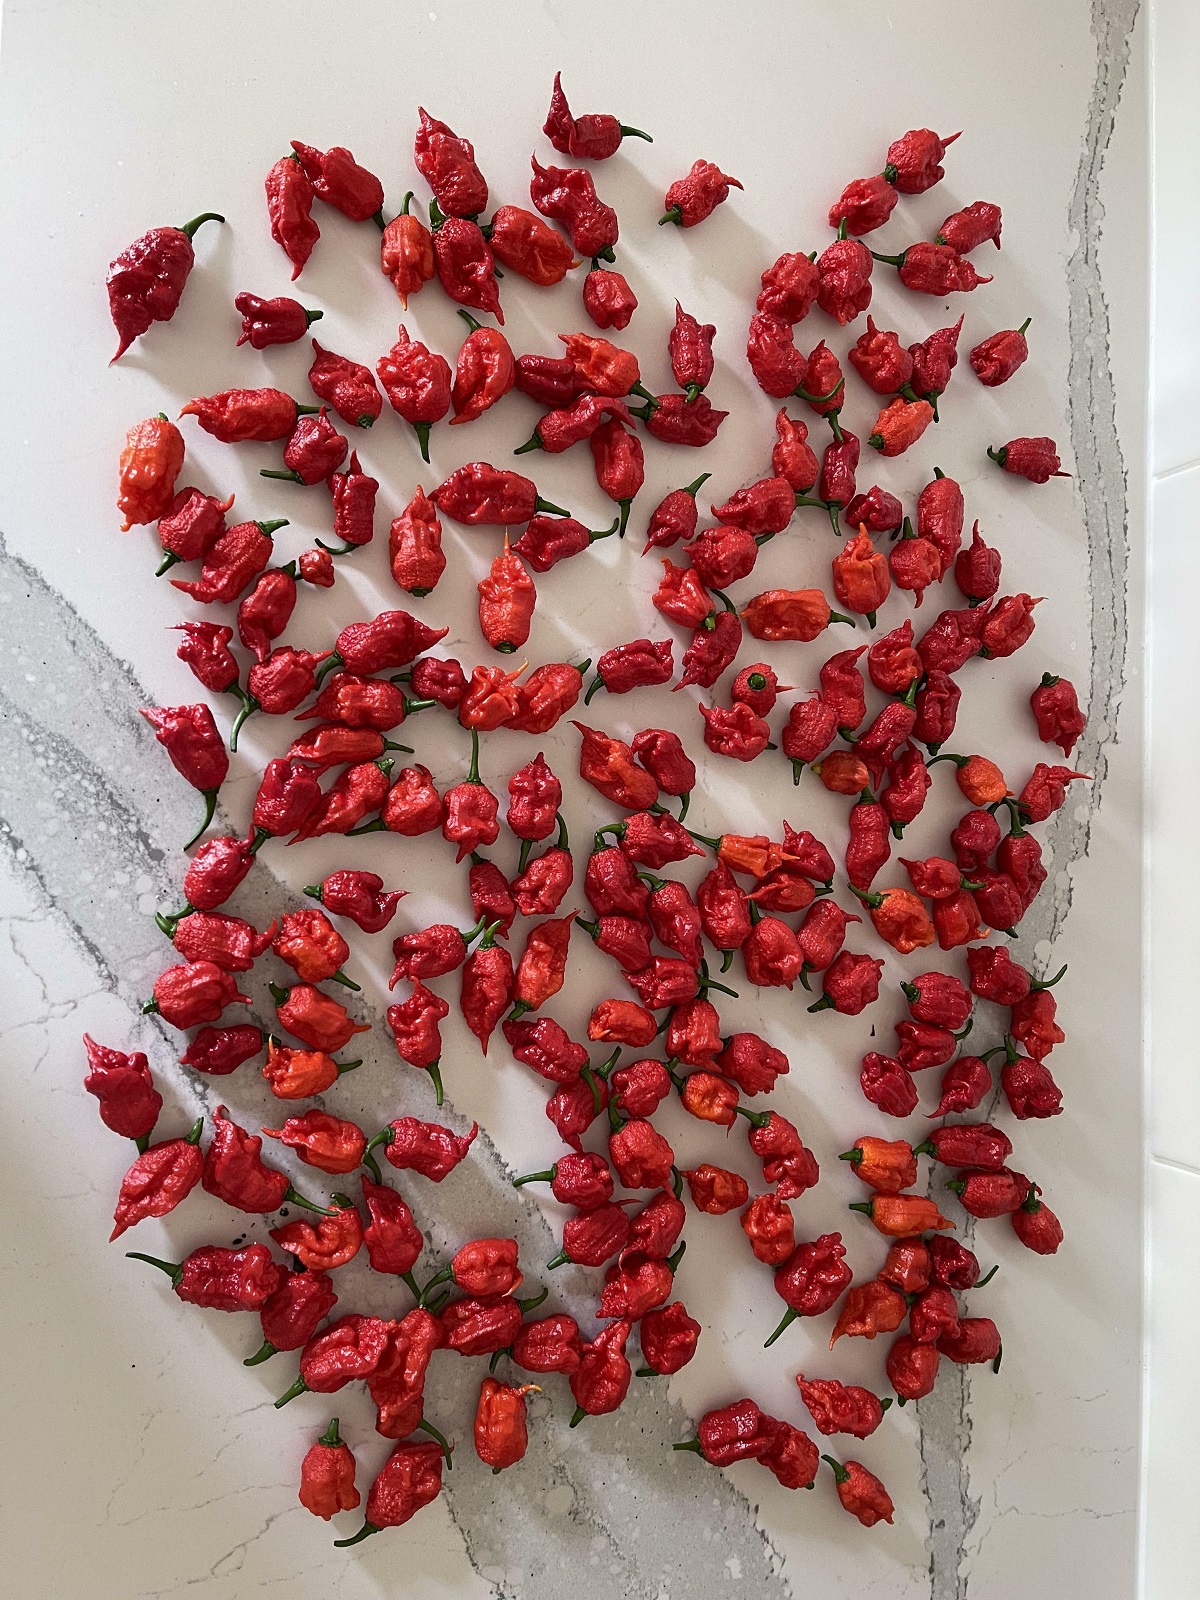 Carolina Reapers I Harvested Yesterday From One Plant